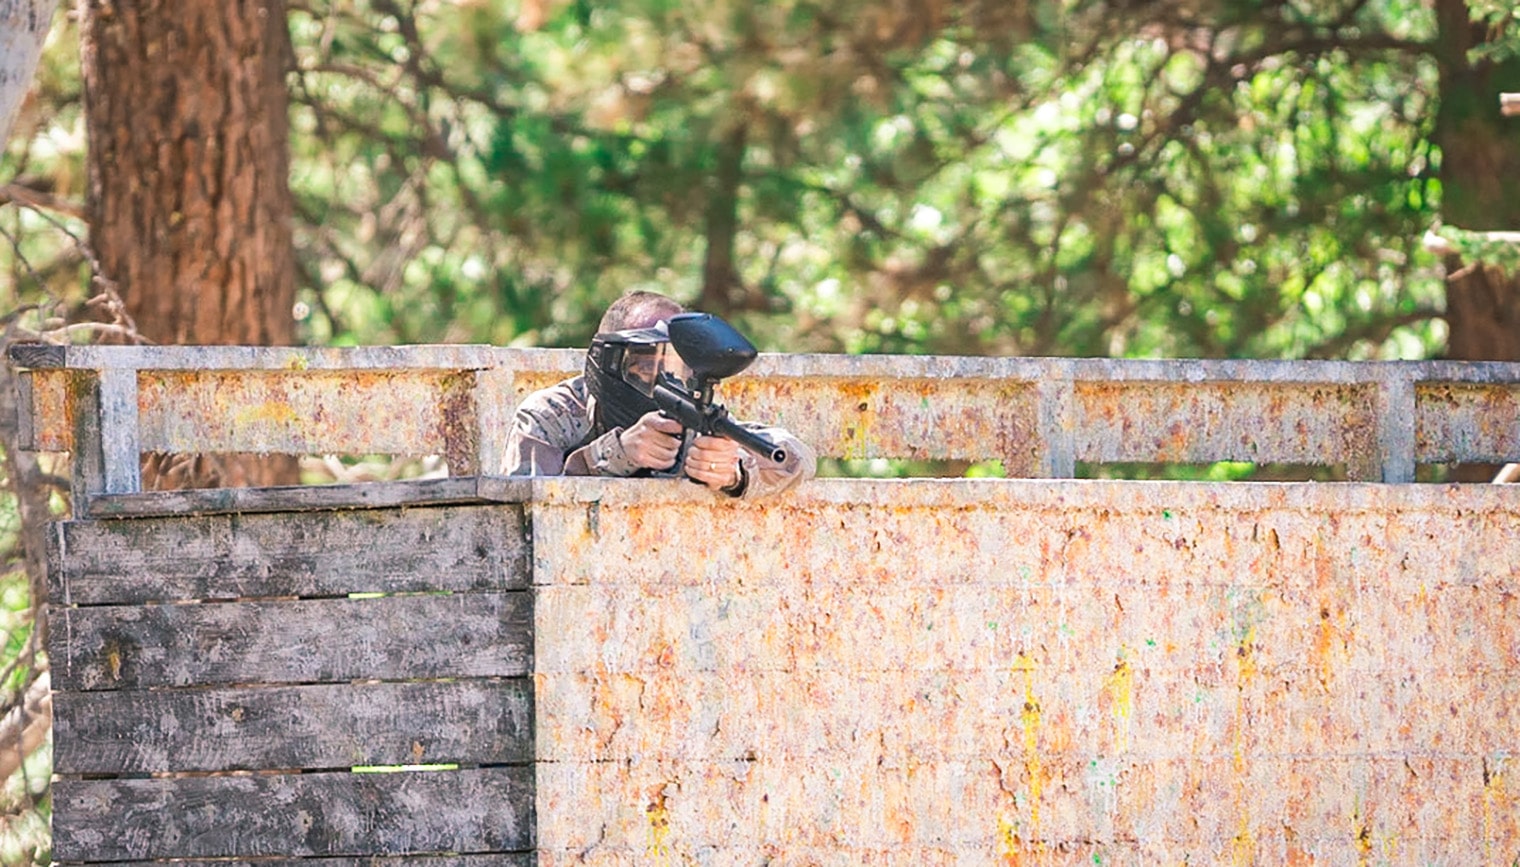 A person aiming a paintball gun from behind a barrier.